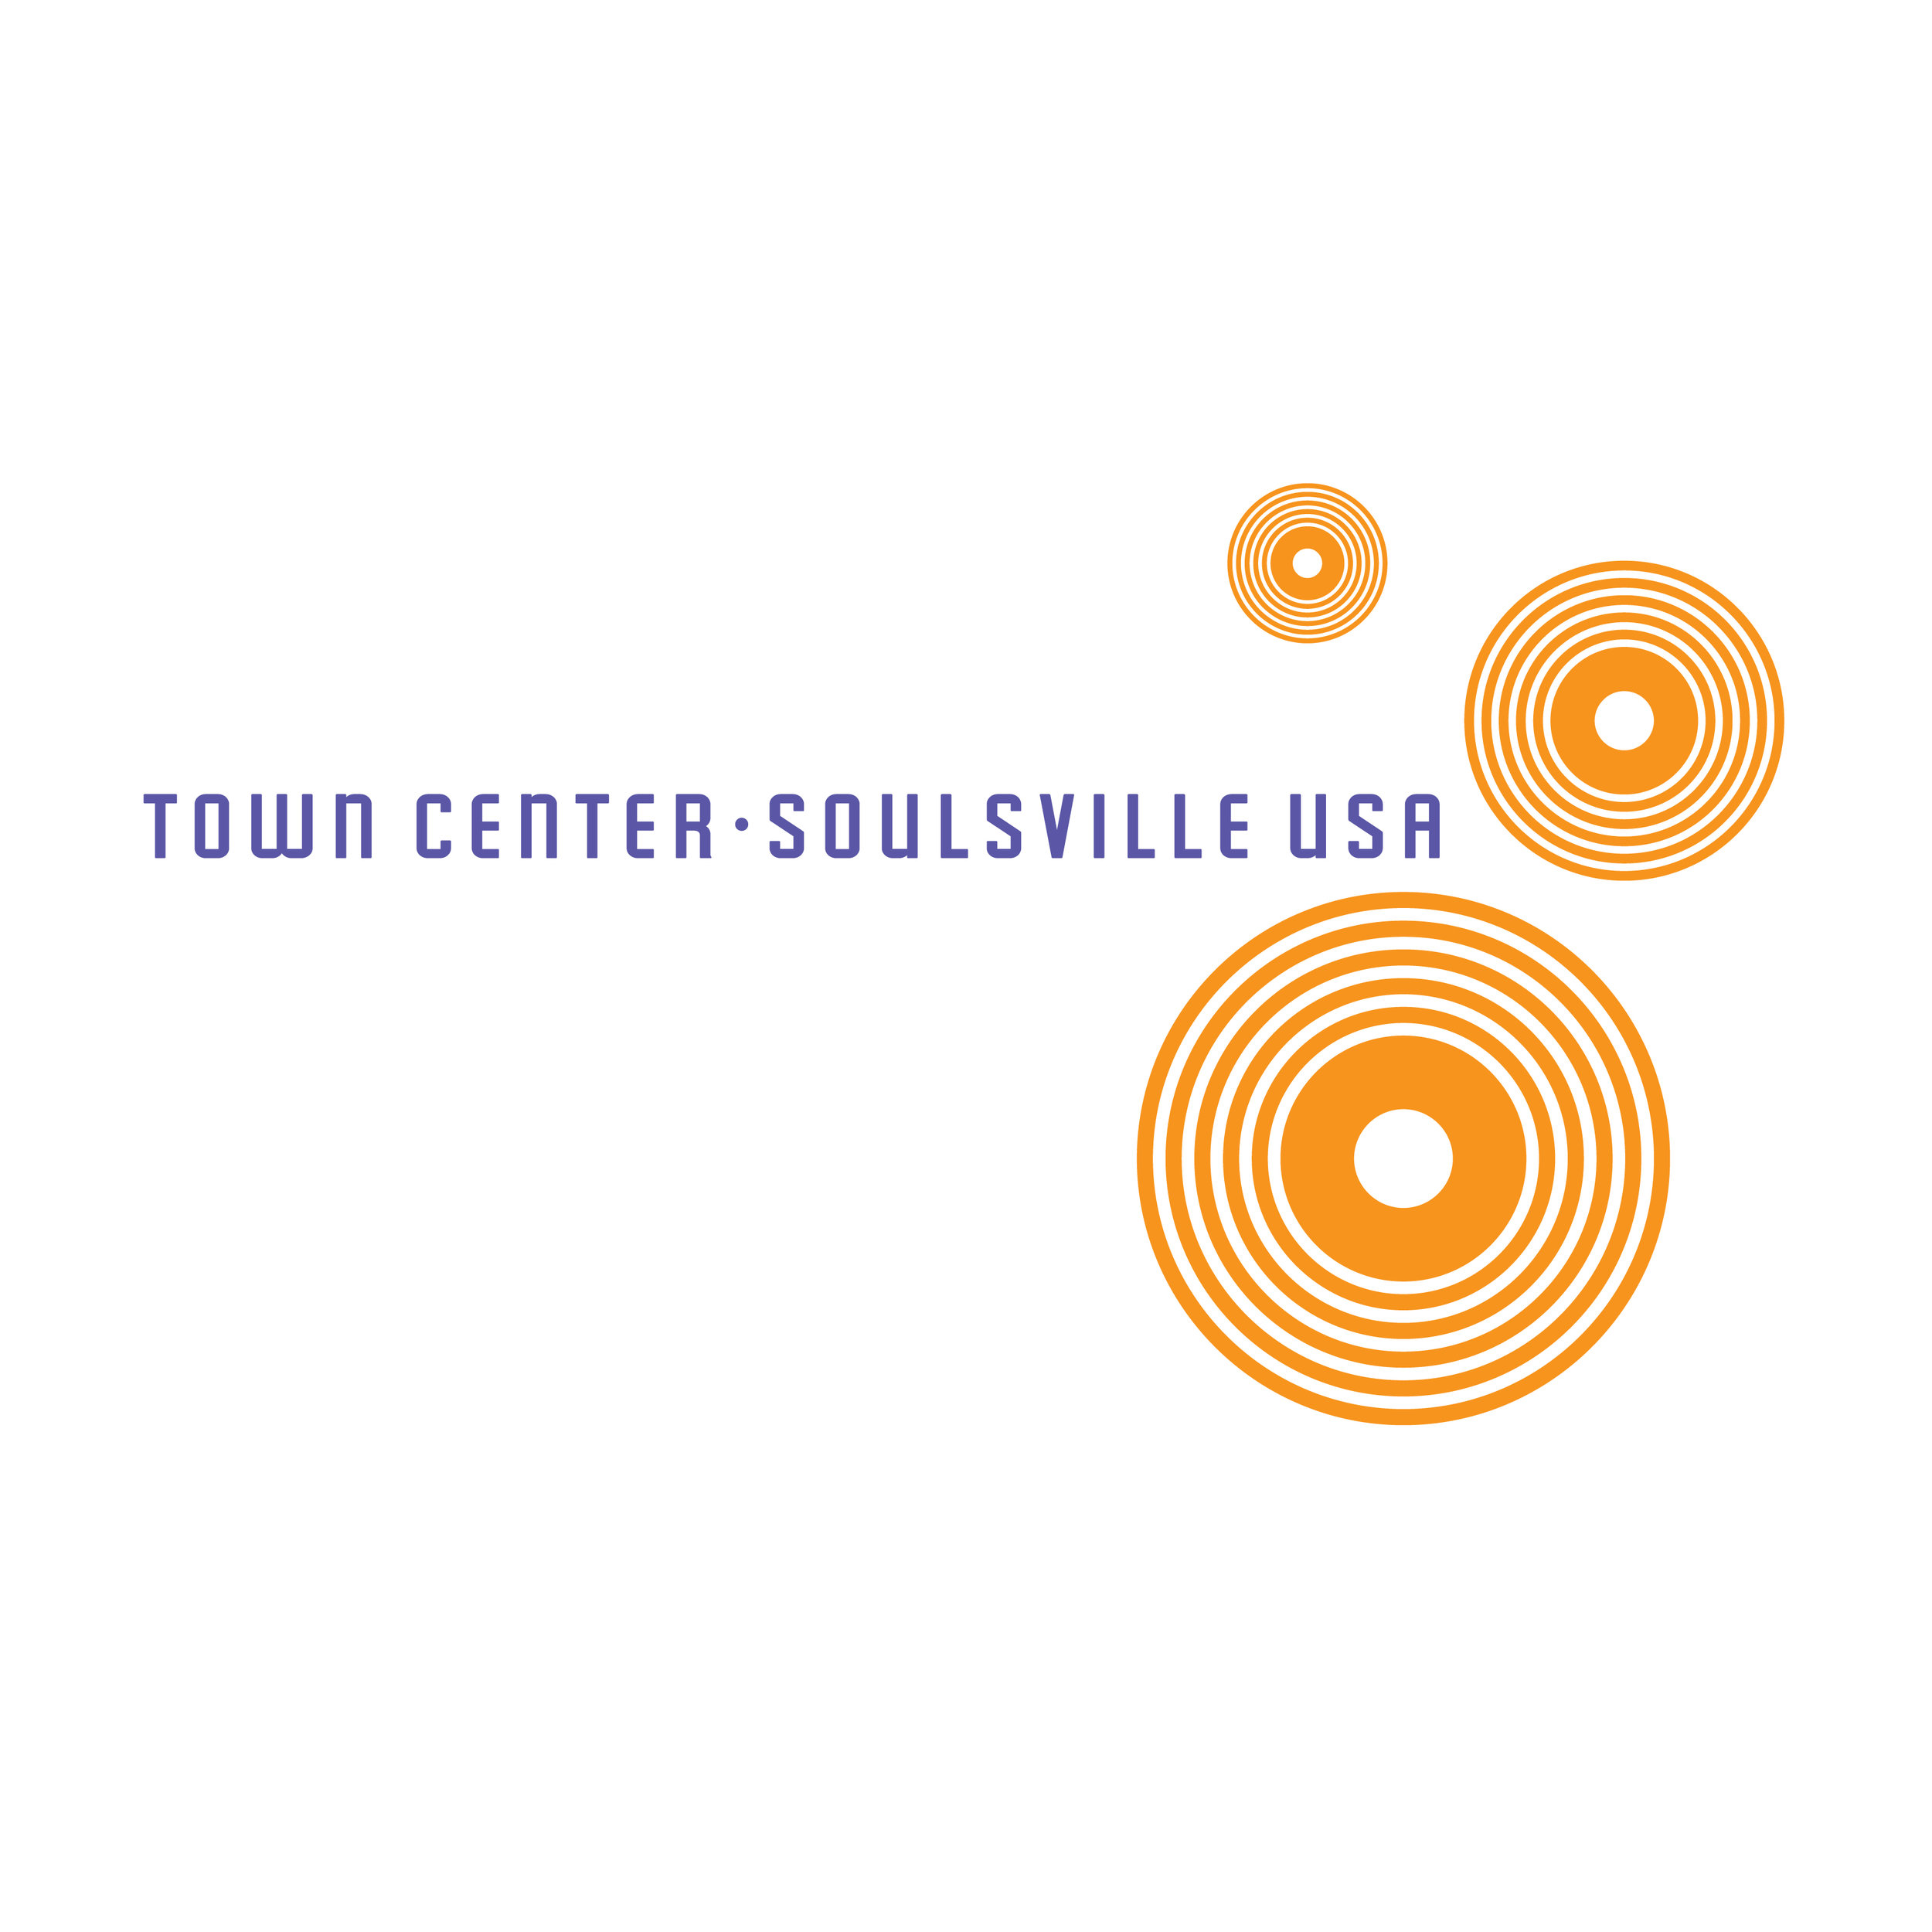  Town Center Soulsville USA project logo  Branding creative and design by Chuck Mitchell 